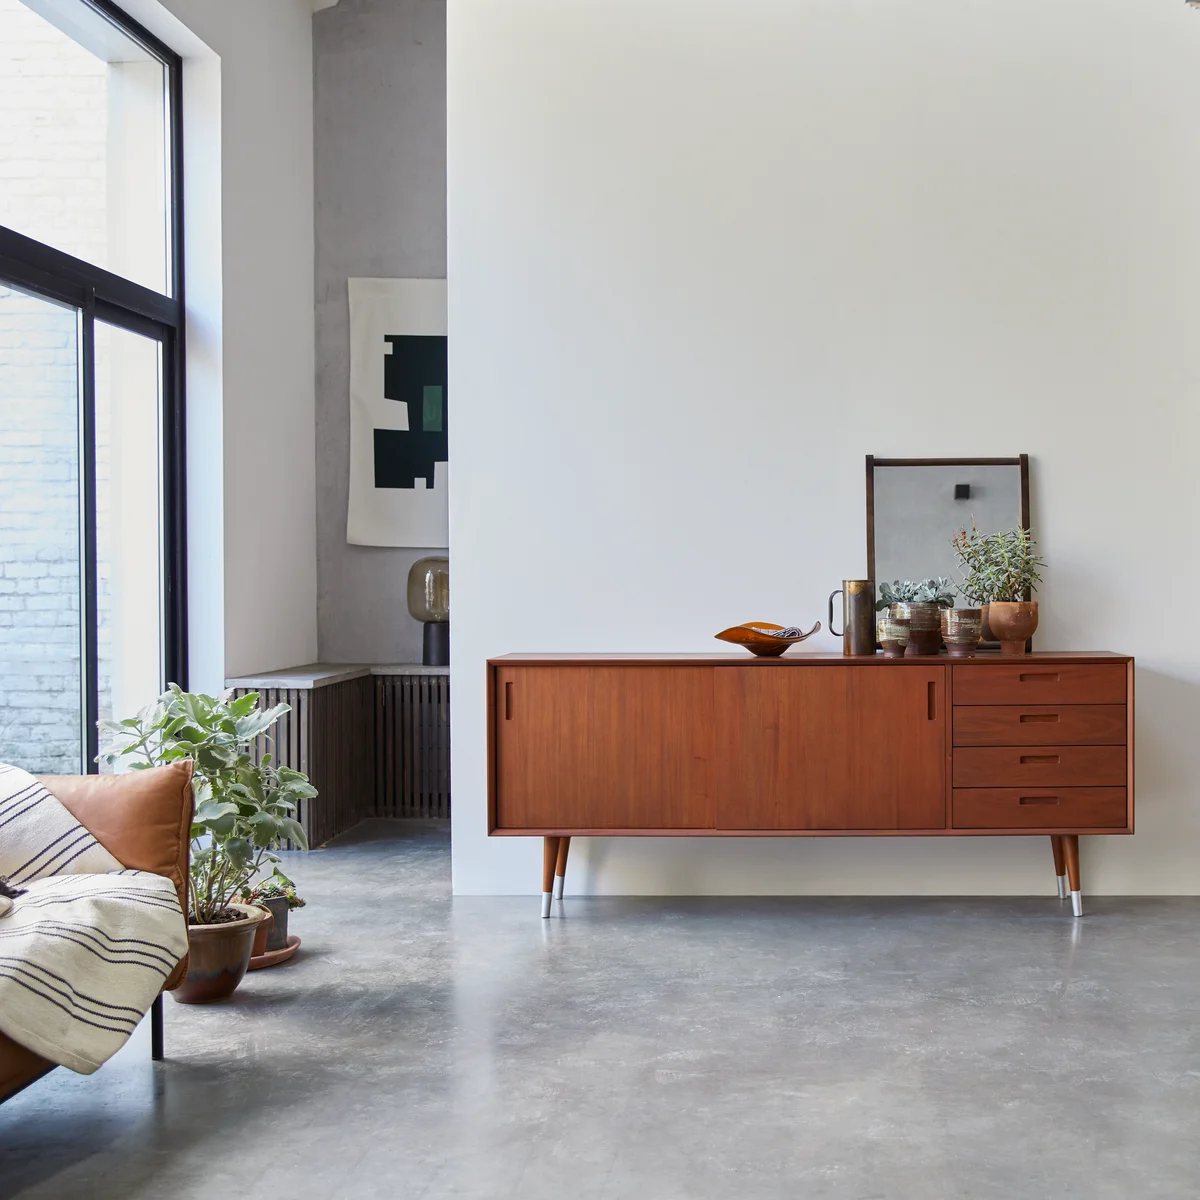 Une enfilade scandinave style années 50